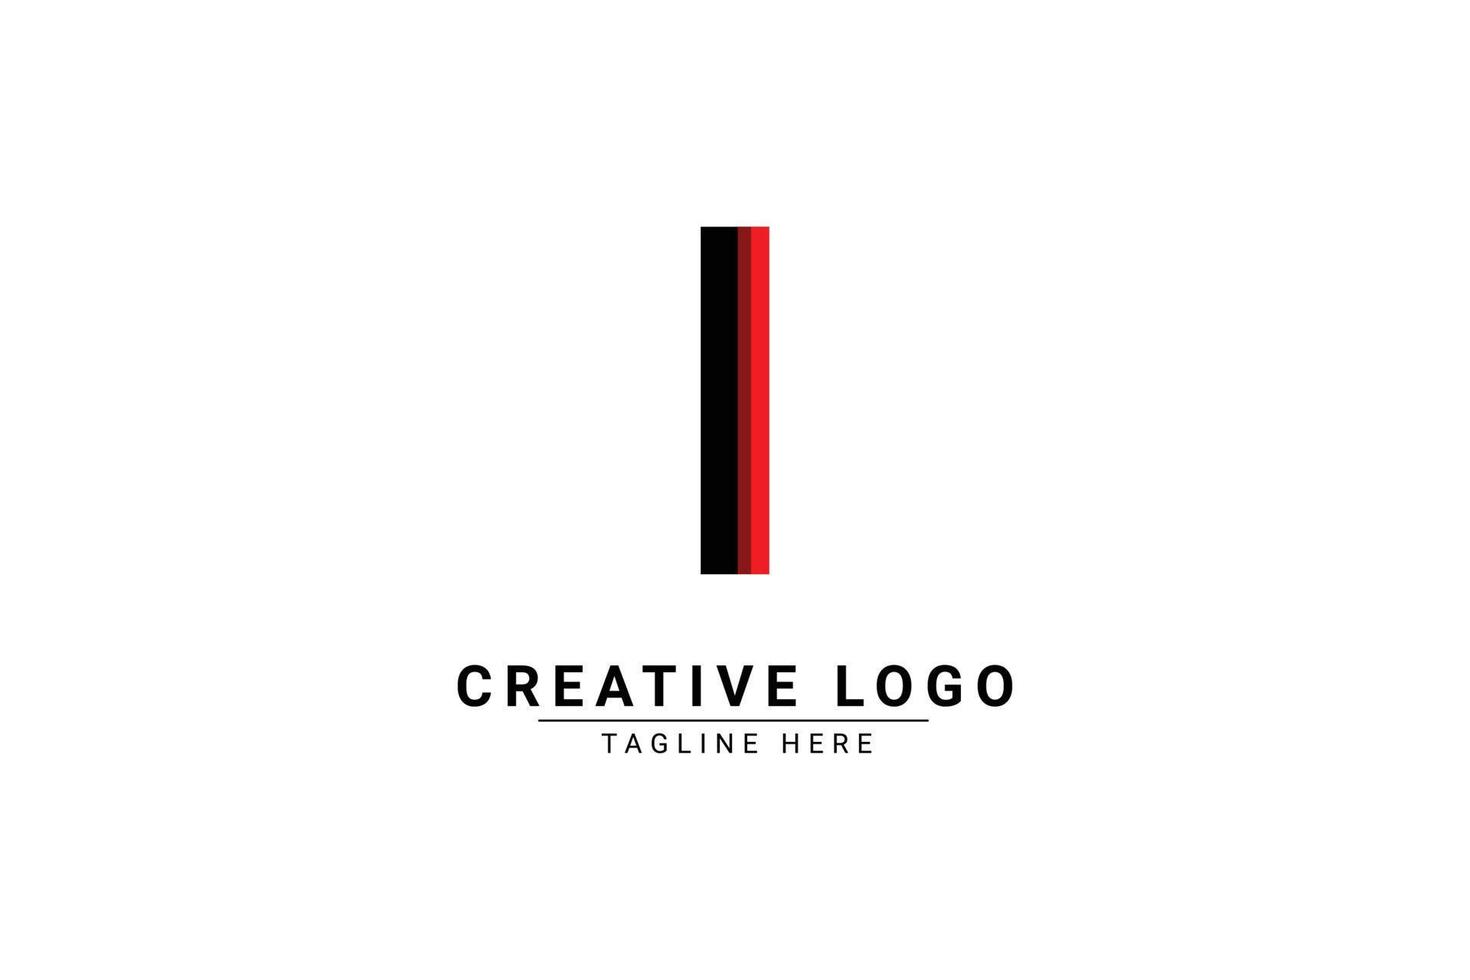 Initial Letter I Logo. Red and black shape C Letter logo with shadow usable for Business and Branding Logos. Flat Vector Logo Design Template Element.